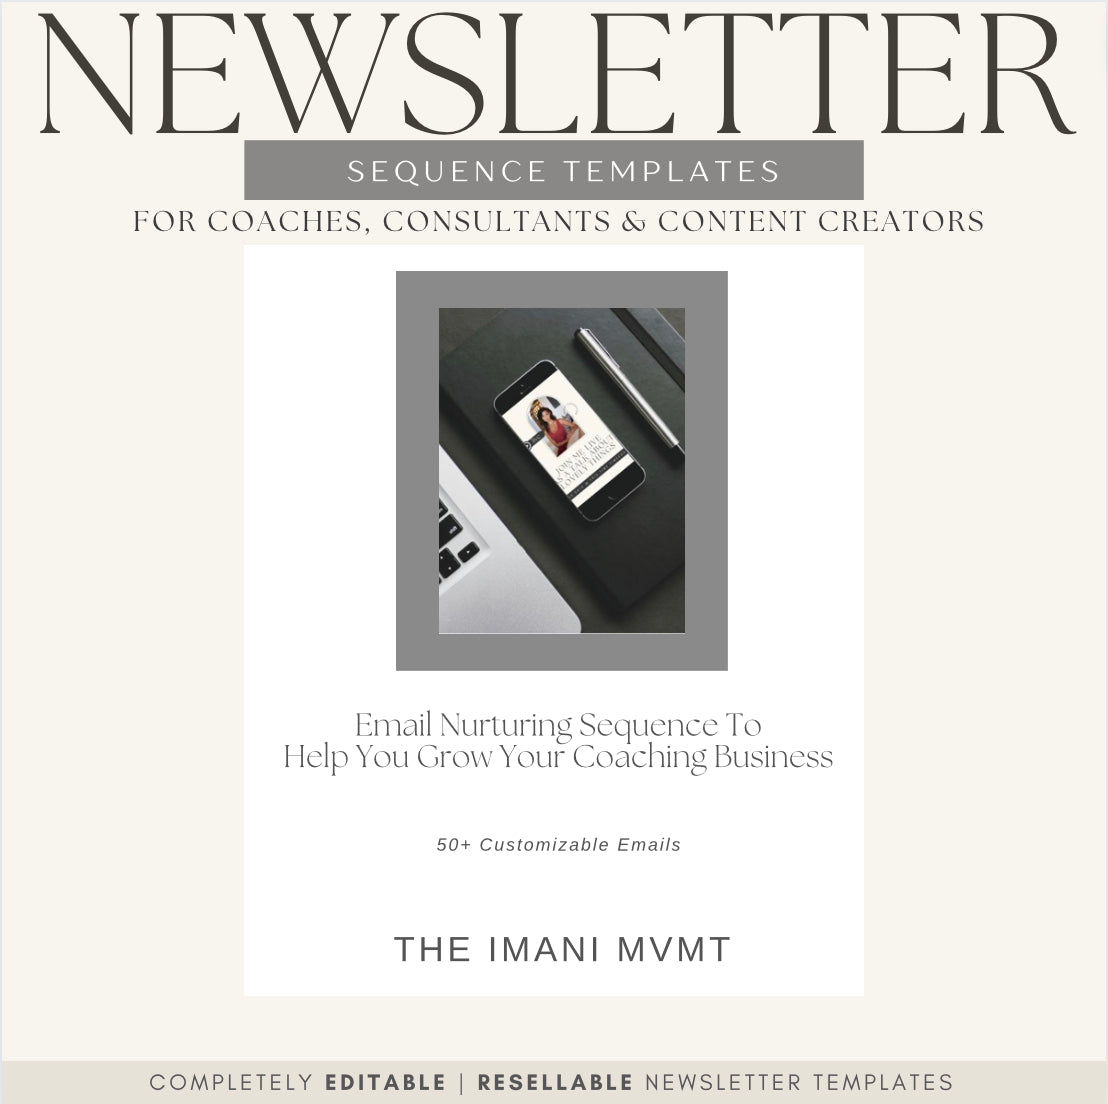 Annual Newsletter Templates